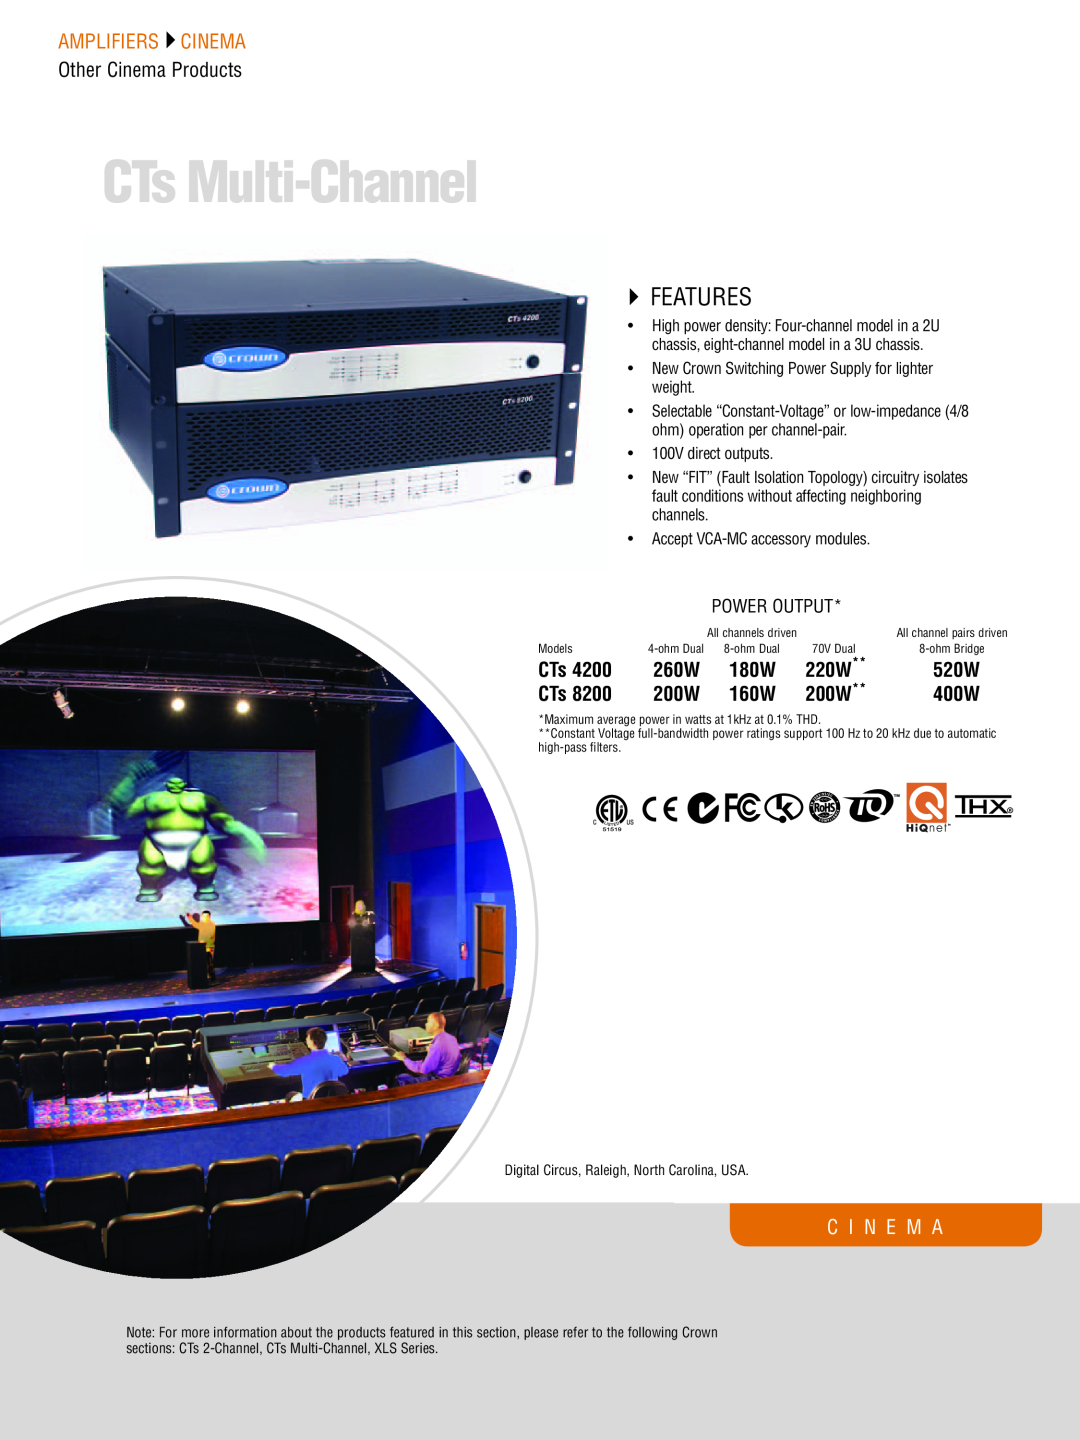 Crown CTS 600 manual CTs Multi-Channel, `` Features, Amplifiers  Cinema, Other Cinema Products, C I N E M A, Power Output 